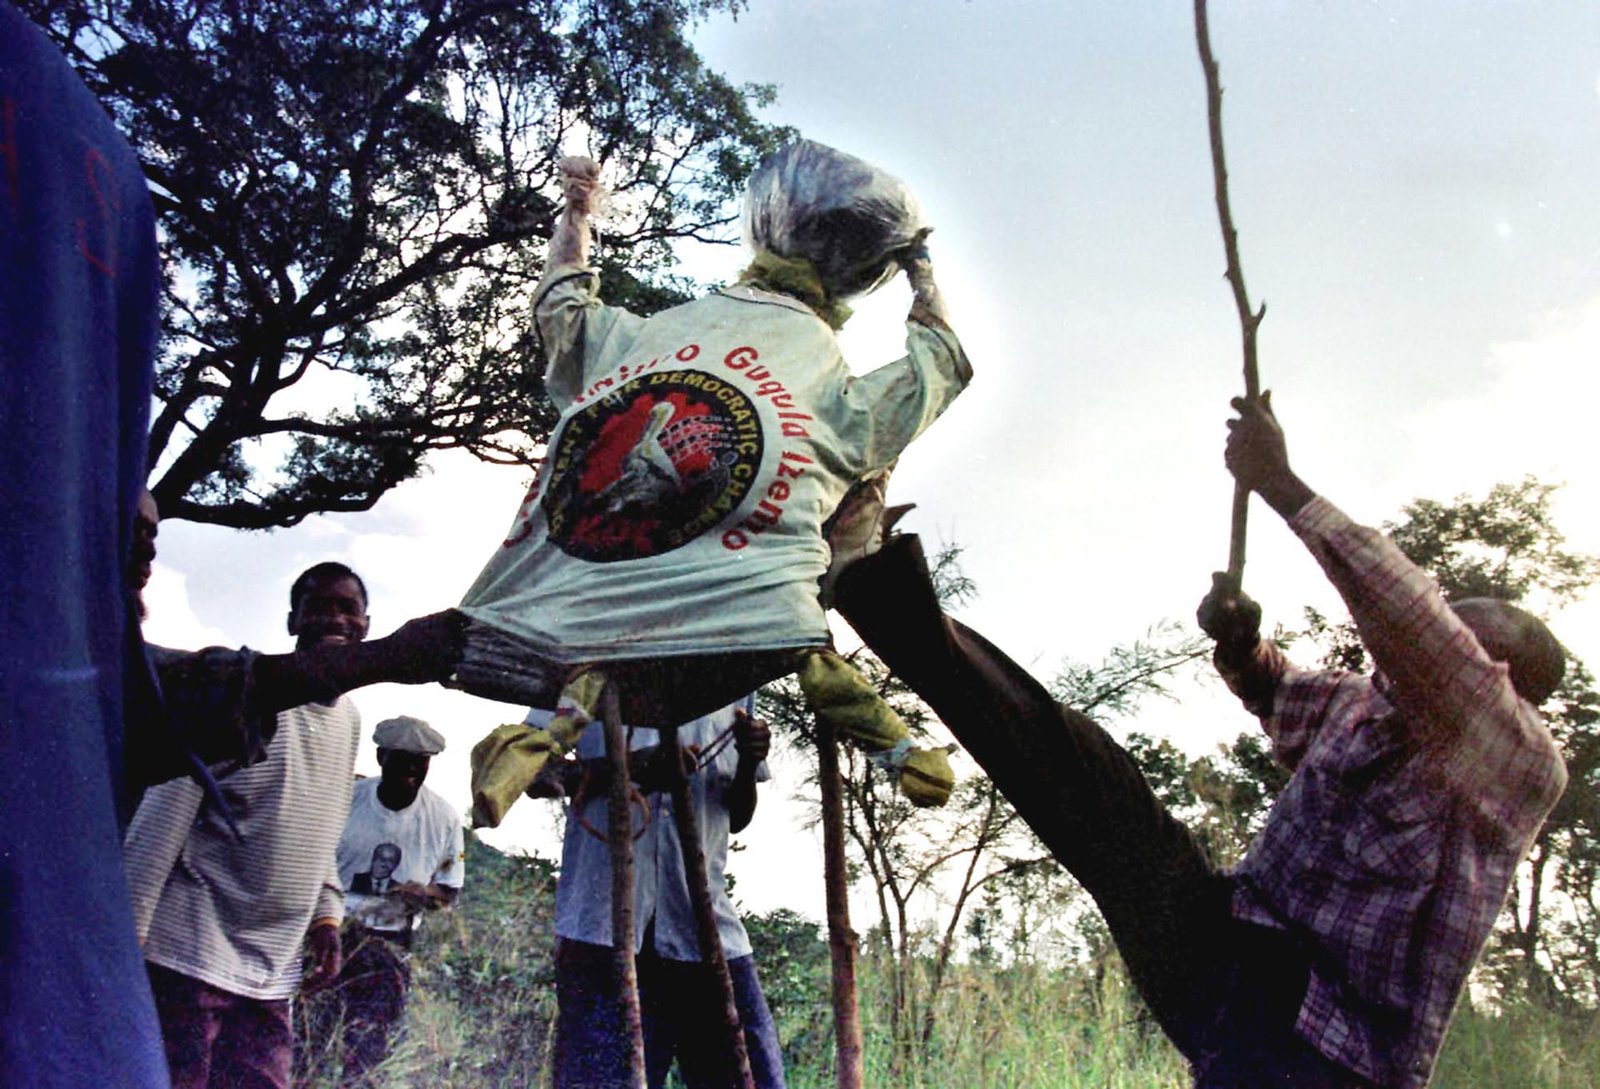  Zimbabwean war veterans kick and beat an effigy of Tsvangirai as tensions flare over land occupations in April 2000. Photograph: Obed Zilwa/AP